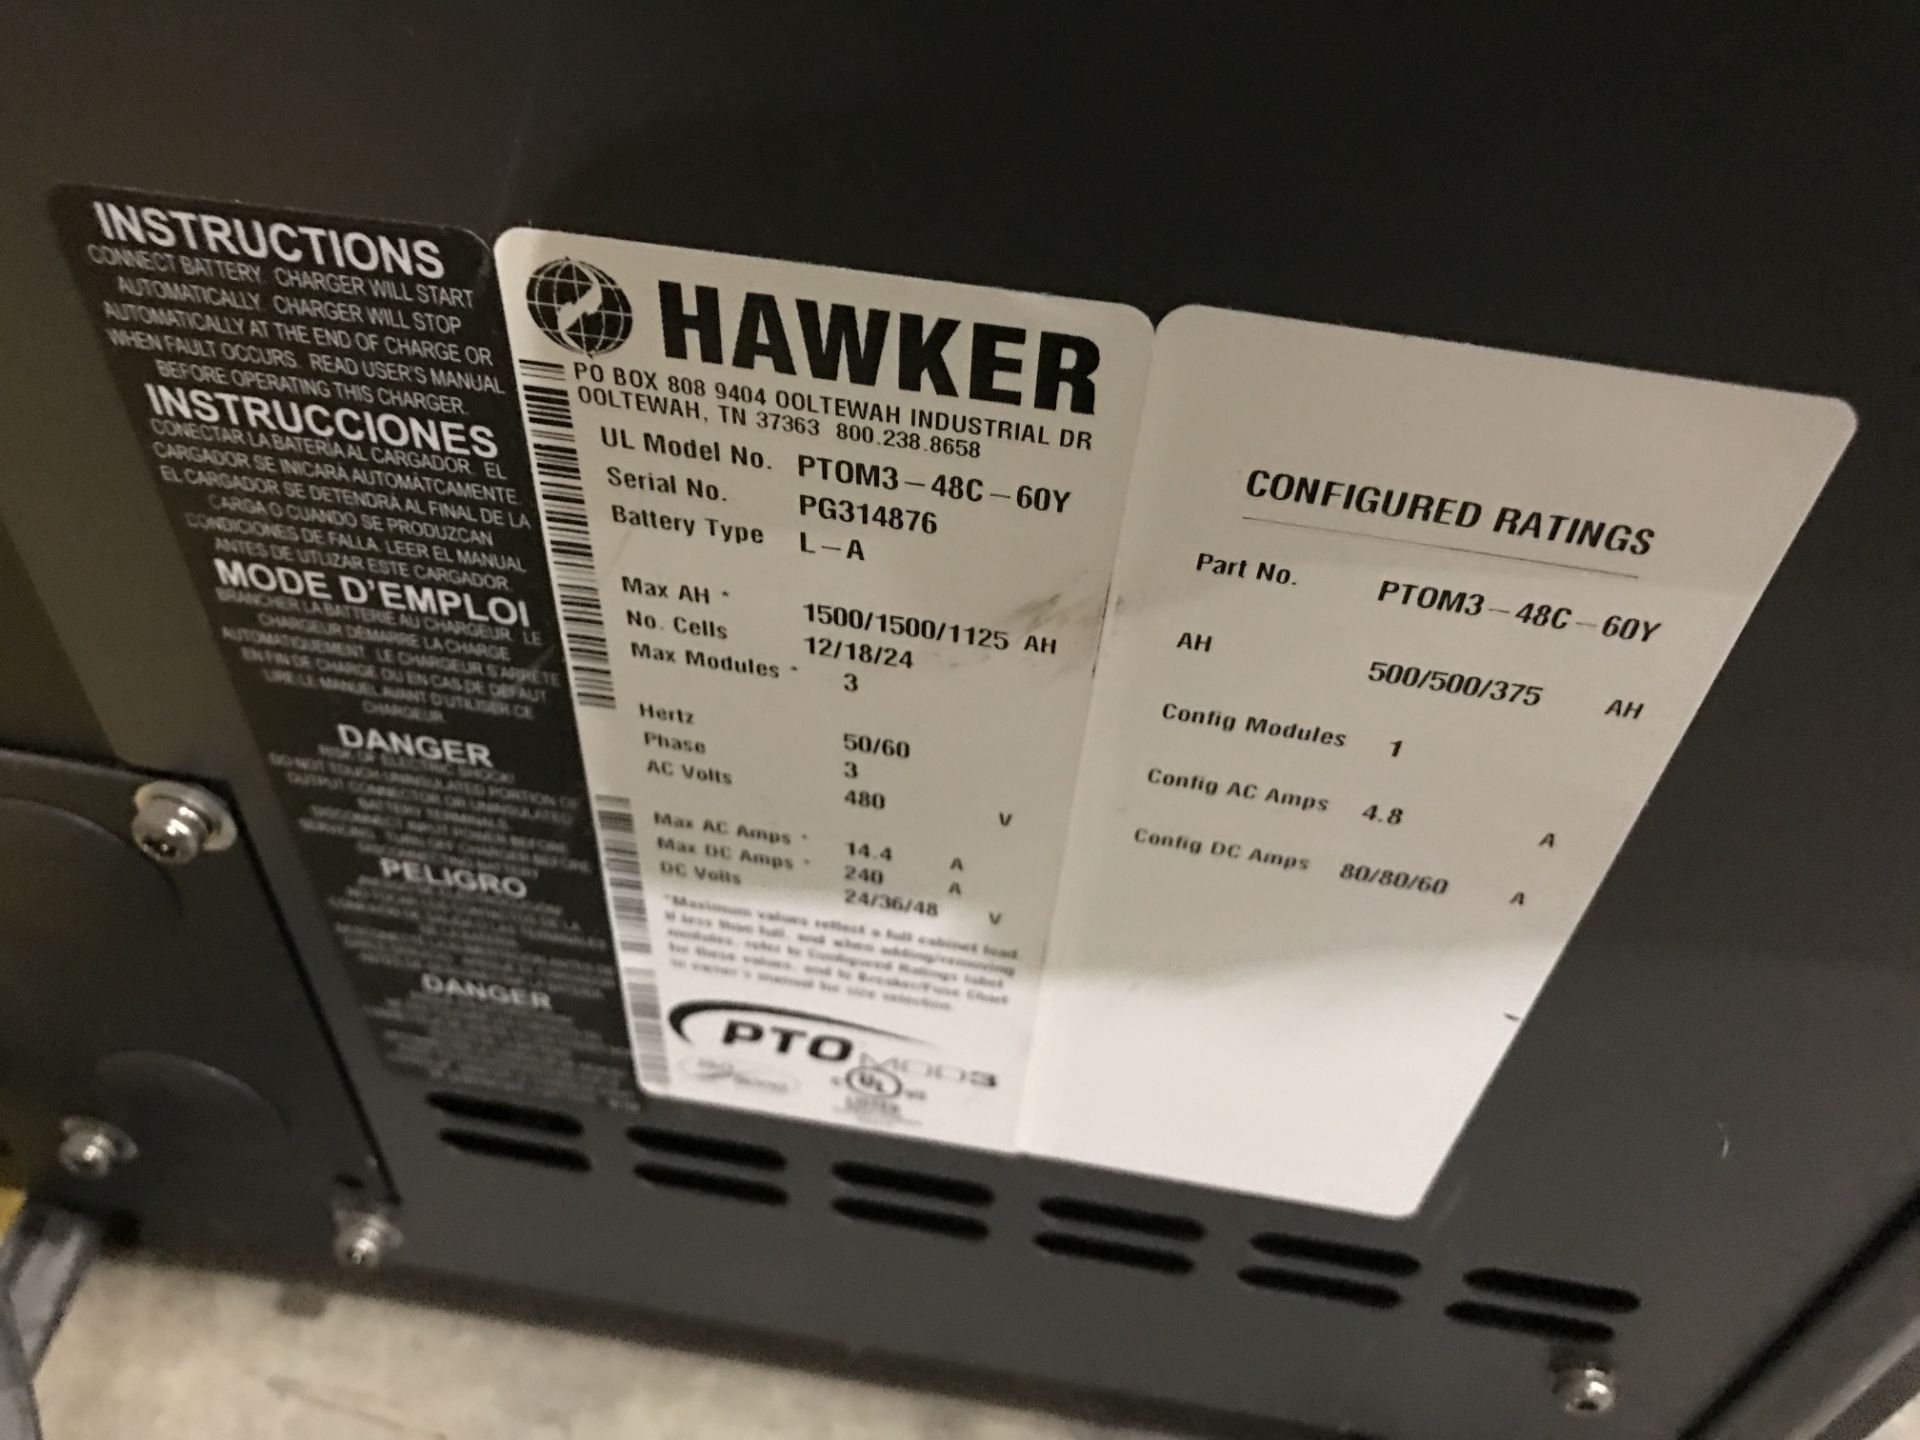 Hawker #PTOM3 Battery Charger, 50/60Hz, 3 Phase, 480V, 14.4 Amp (See Label For More Info) - Image 2 of 2